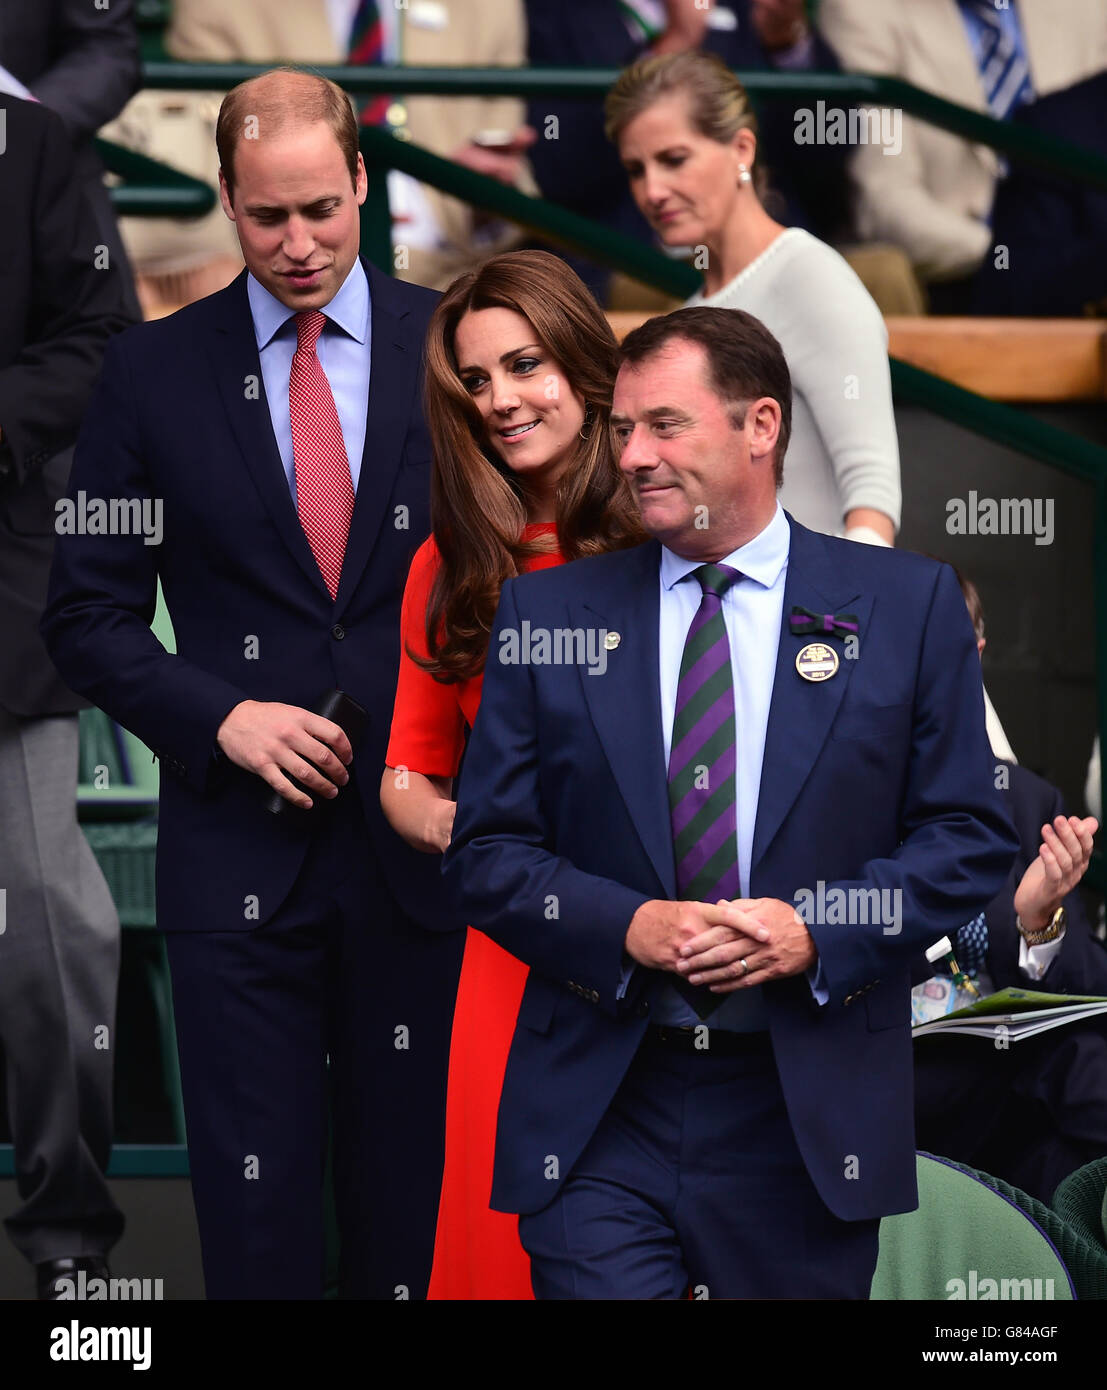 The Duke and Duchess of Cambridge in the royal box during day Nine of the Wimbledon Championships at the All England Lawn Tennis and Croquet Club, Wimbledon. Stock Photo